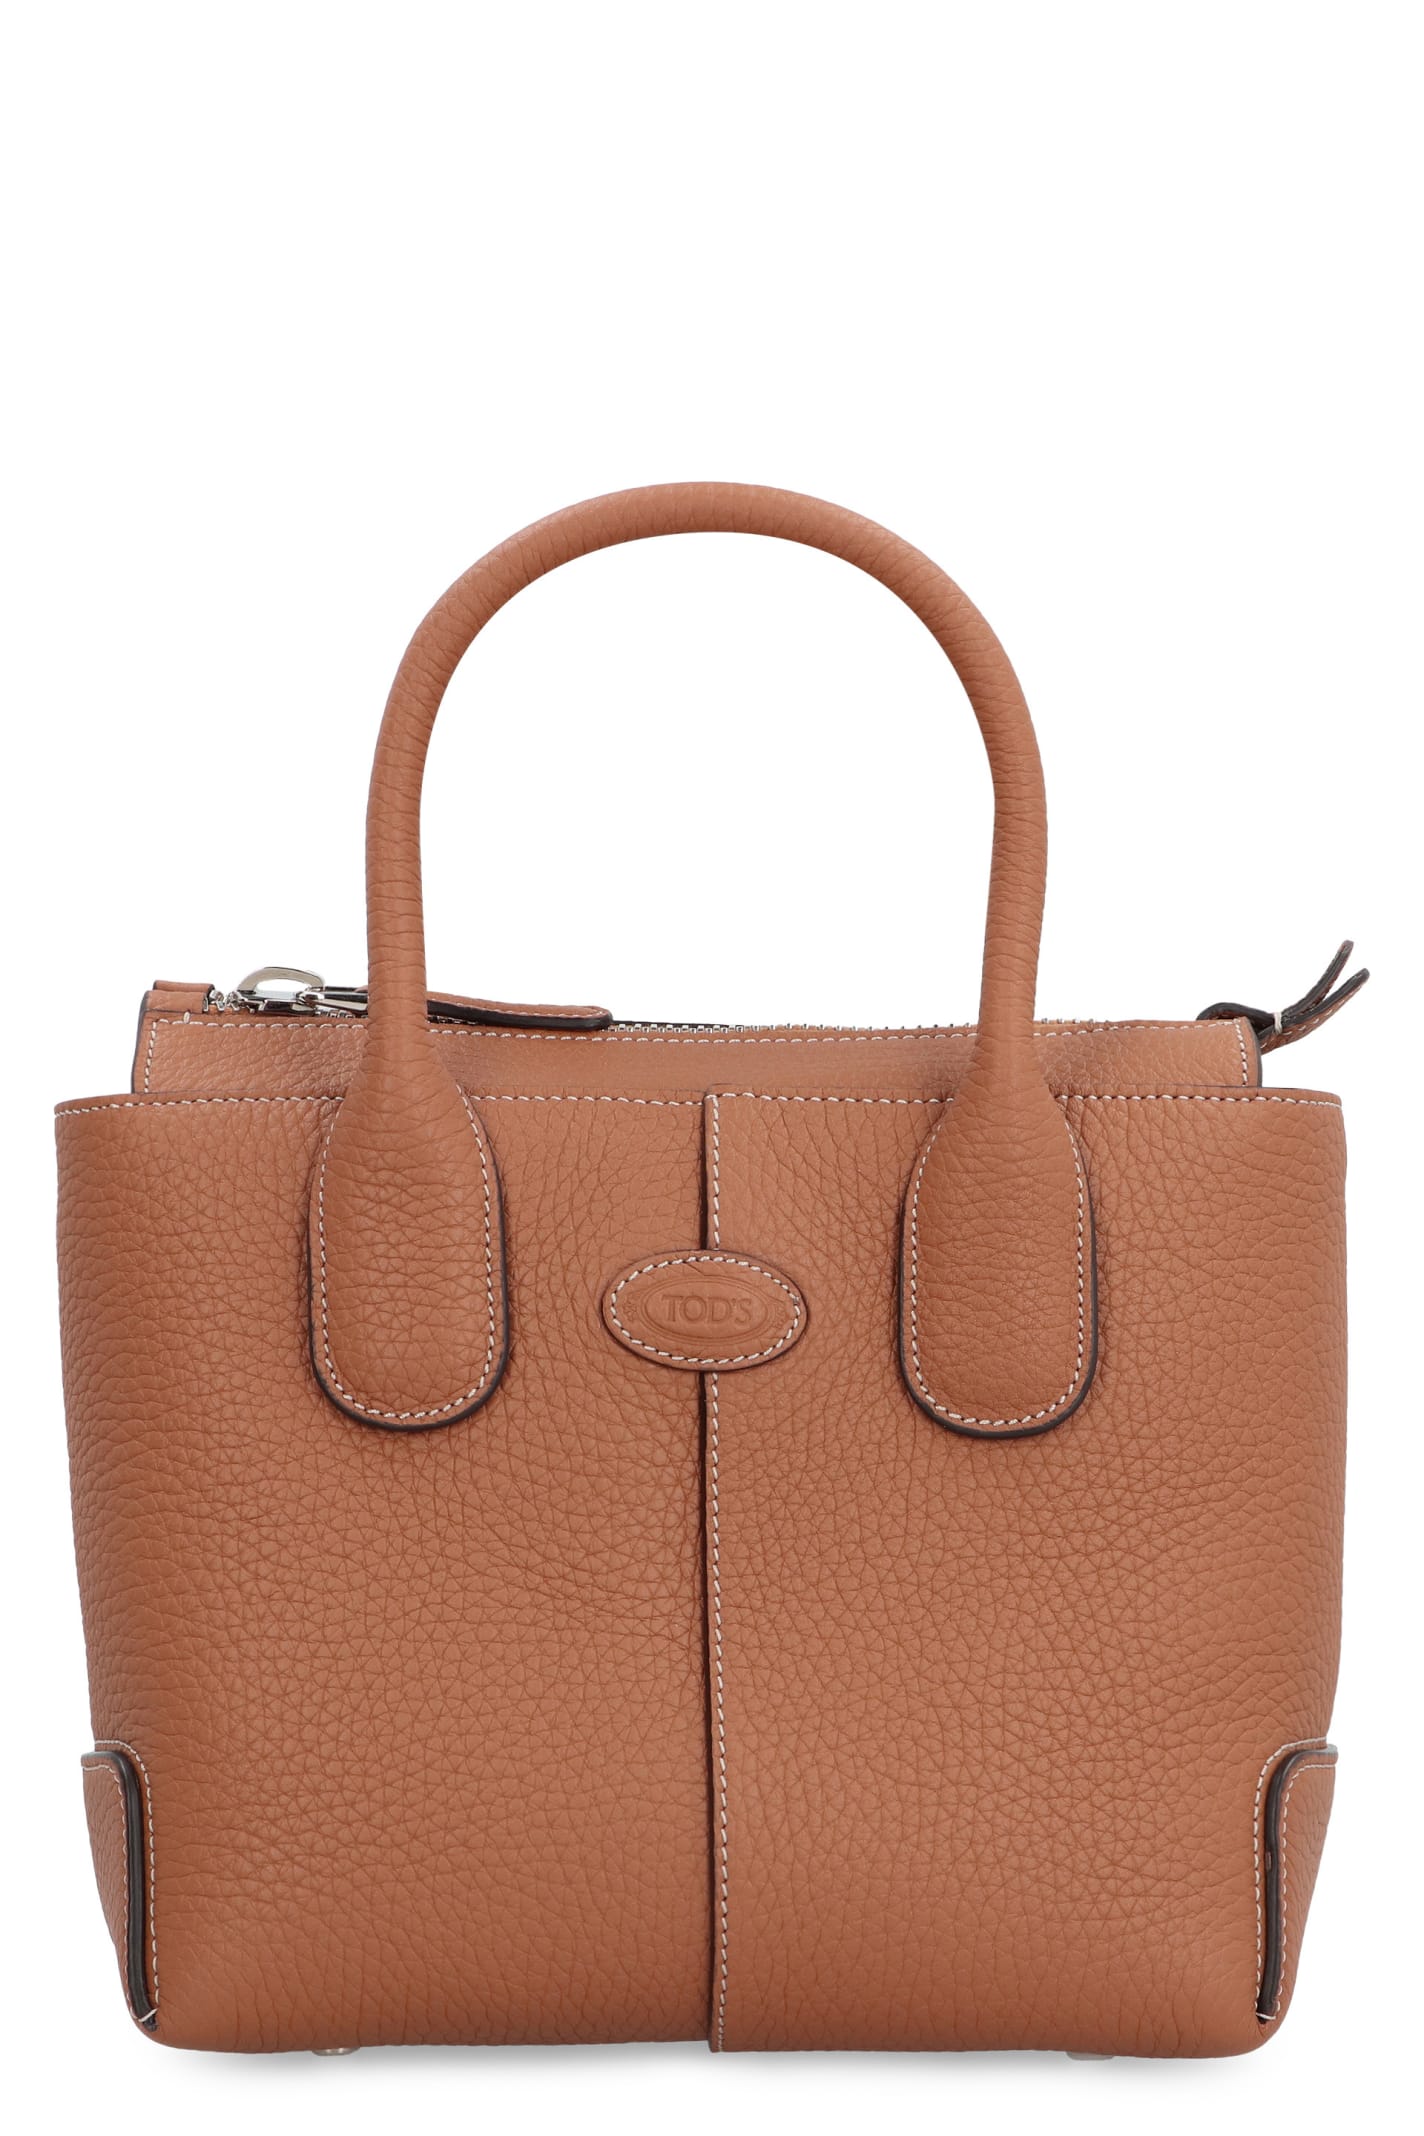 TOD'S TODS DI SMOOTH LEATHER TOTE BAG